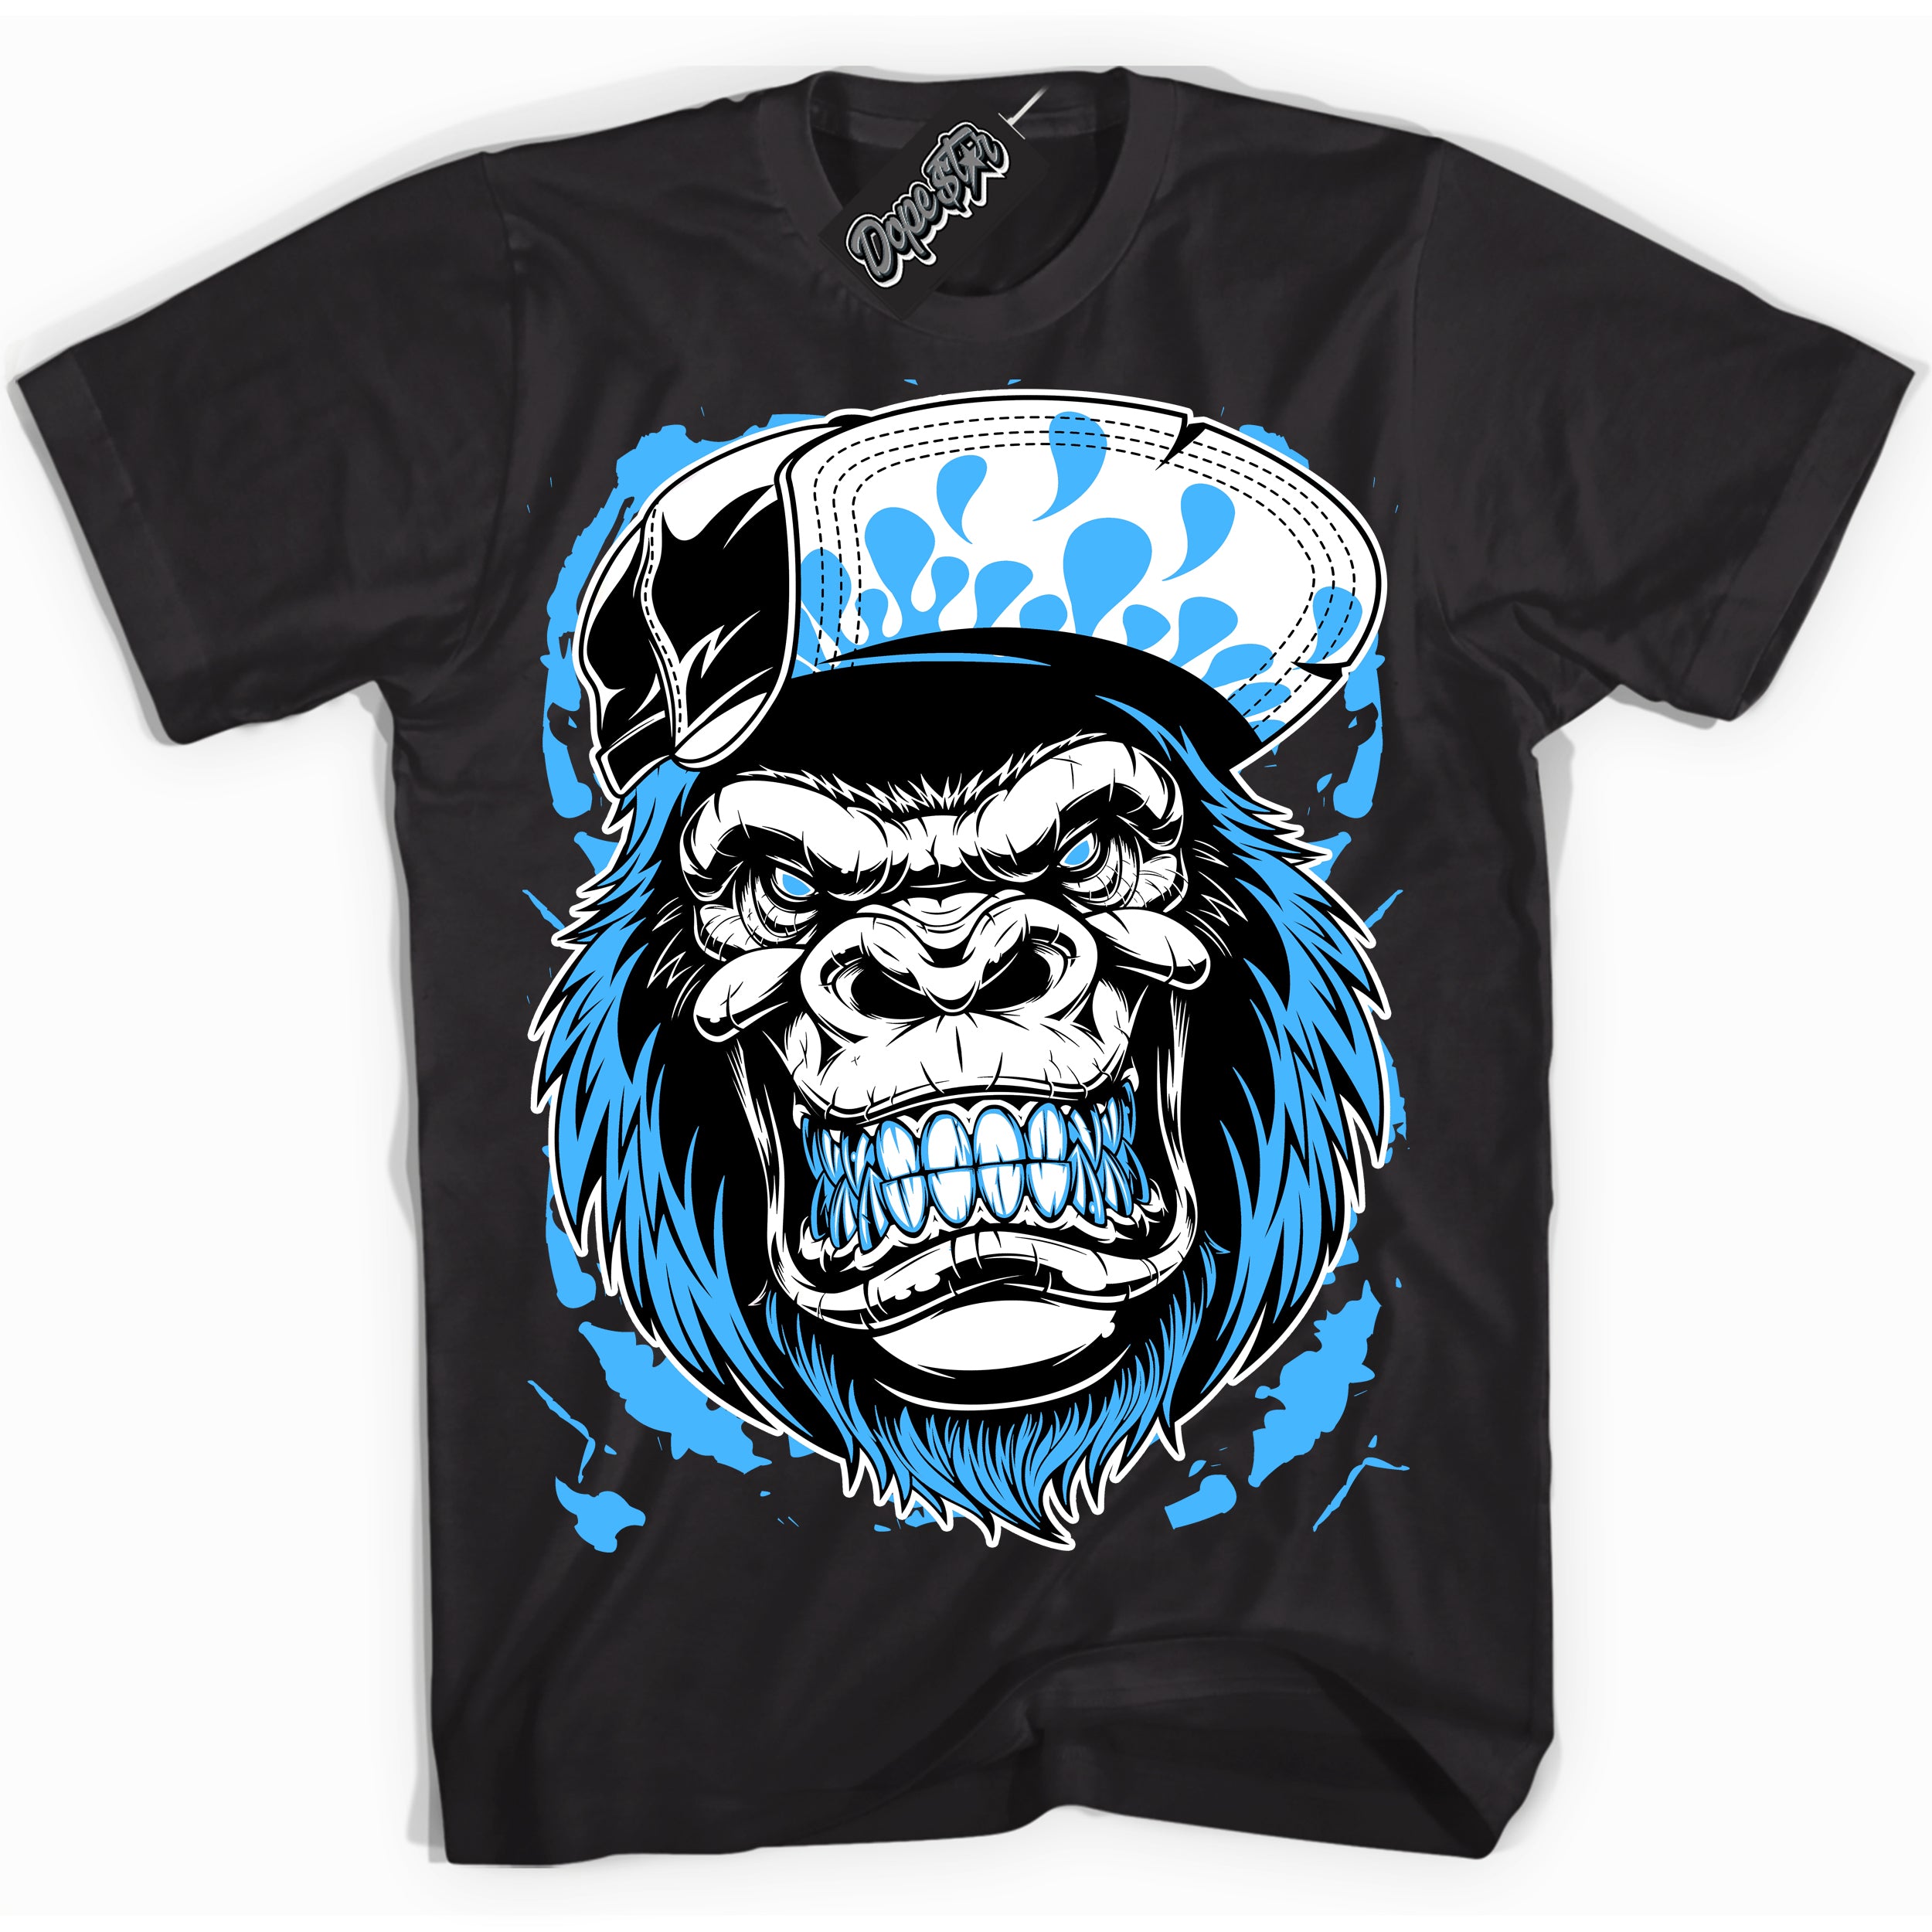 Cool Black graphic tee with “ Gorilla Beast ” design, that perfectly matches Powder Blue 9s sneakers 